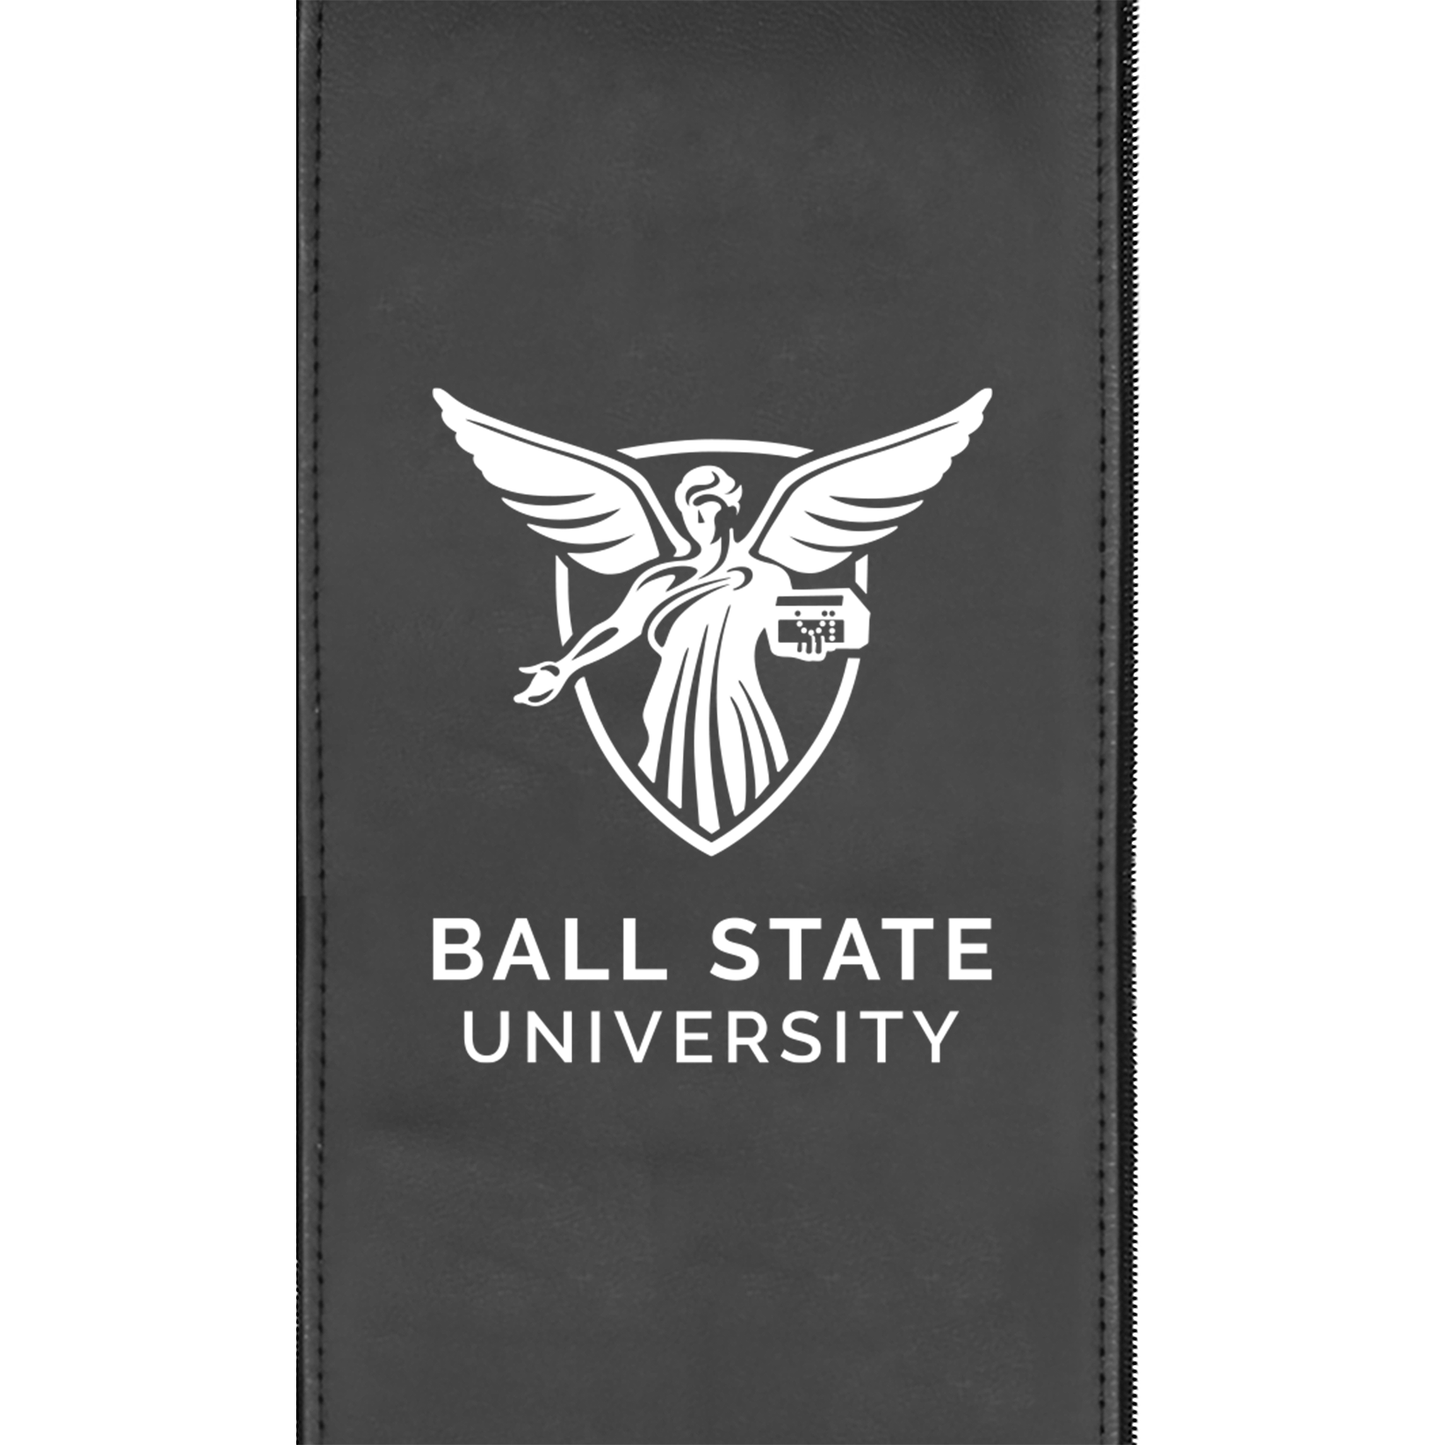 Silver Club Chair with Ball State University